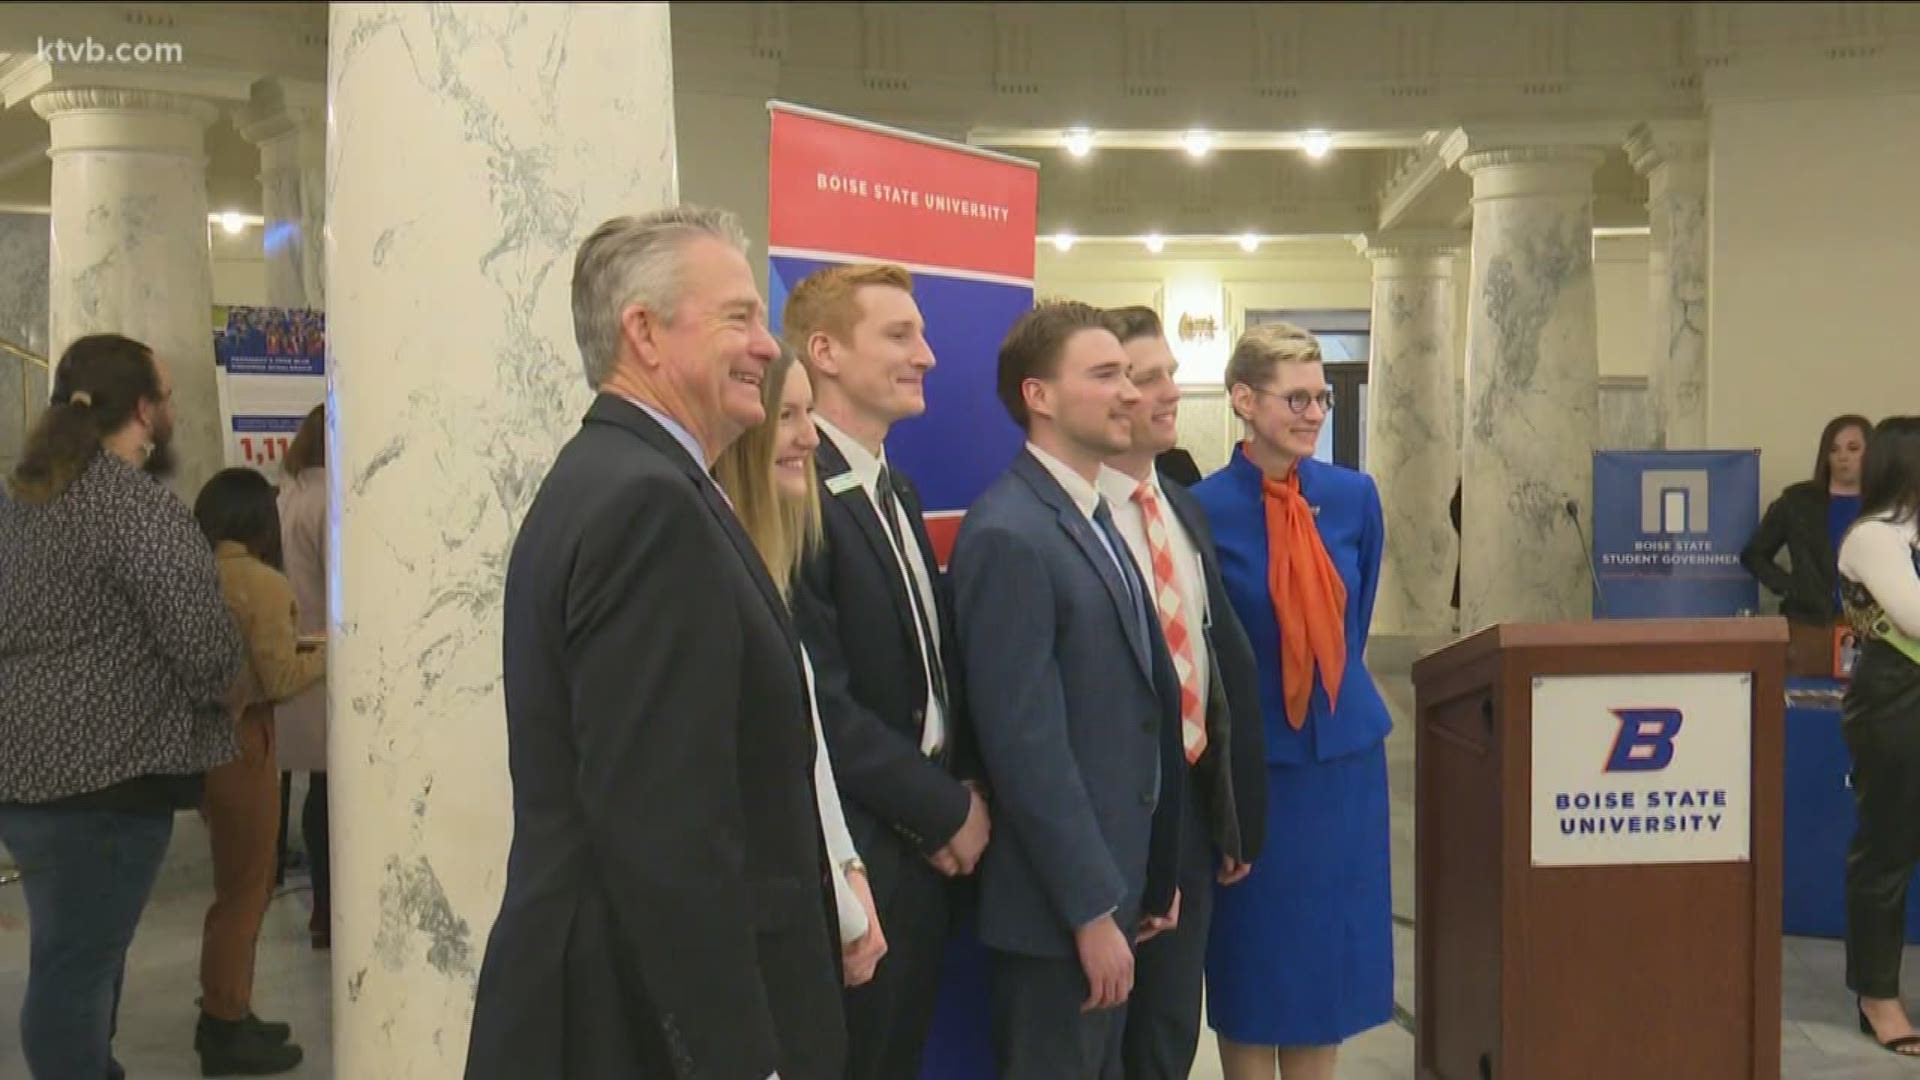 The new Boise State scholarship is targeting students from rural Idaho communities.